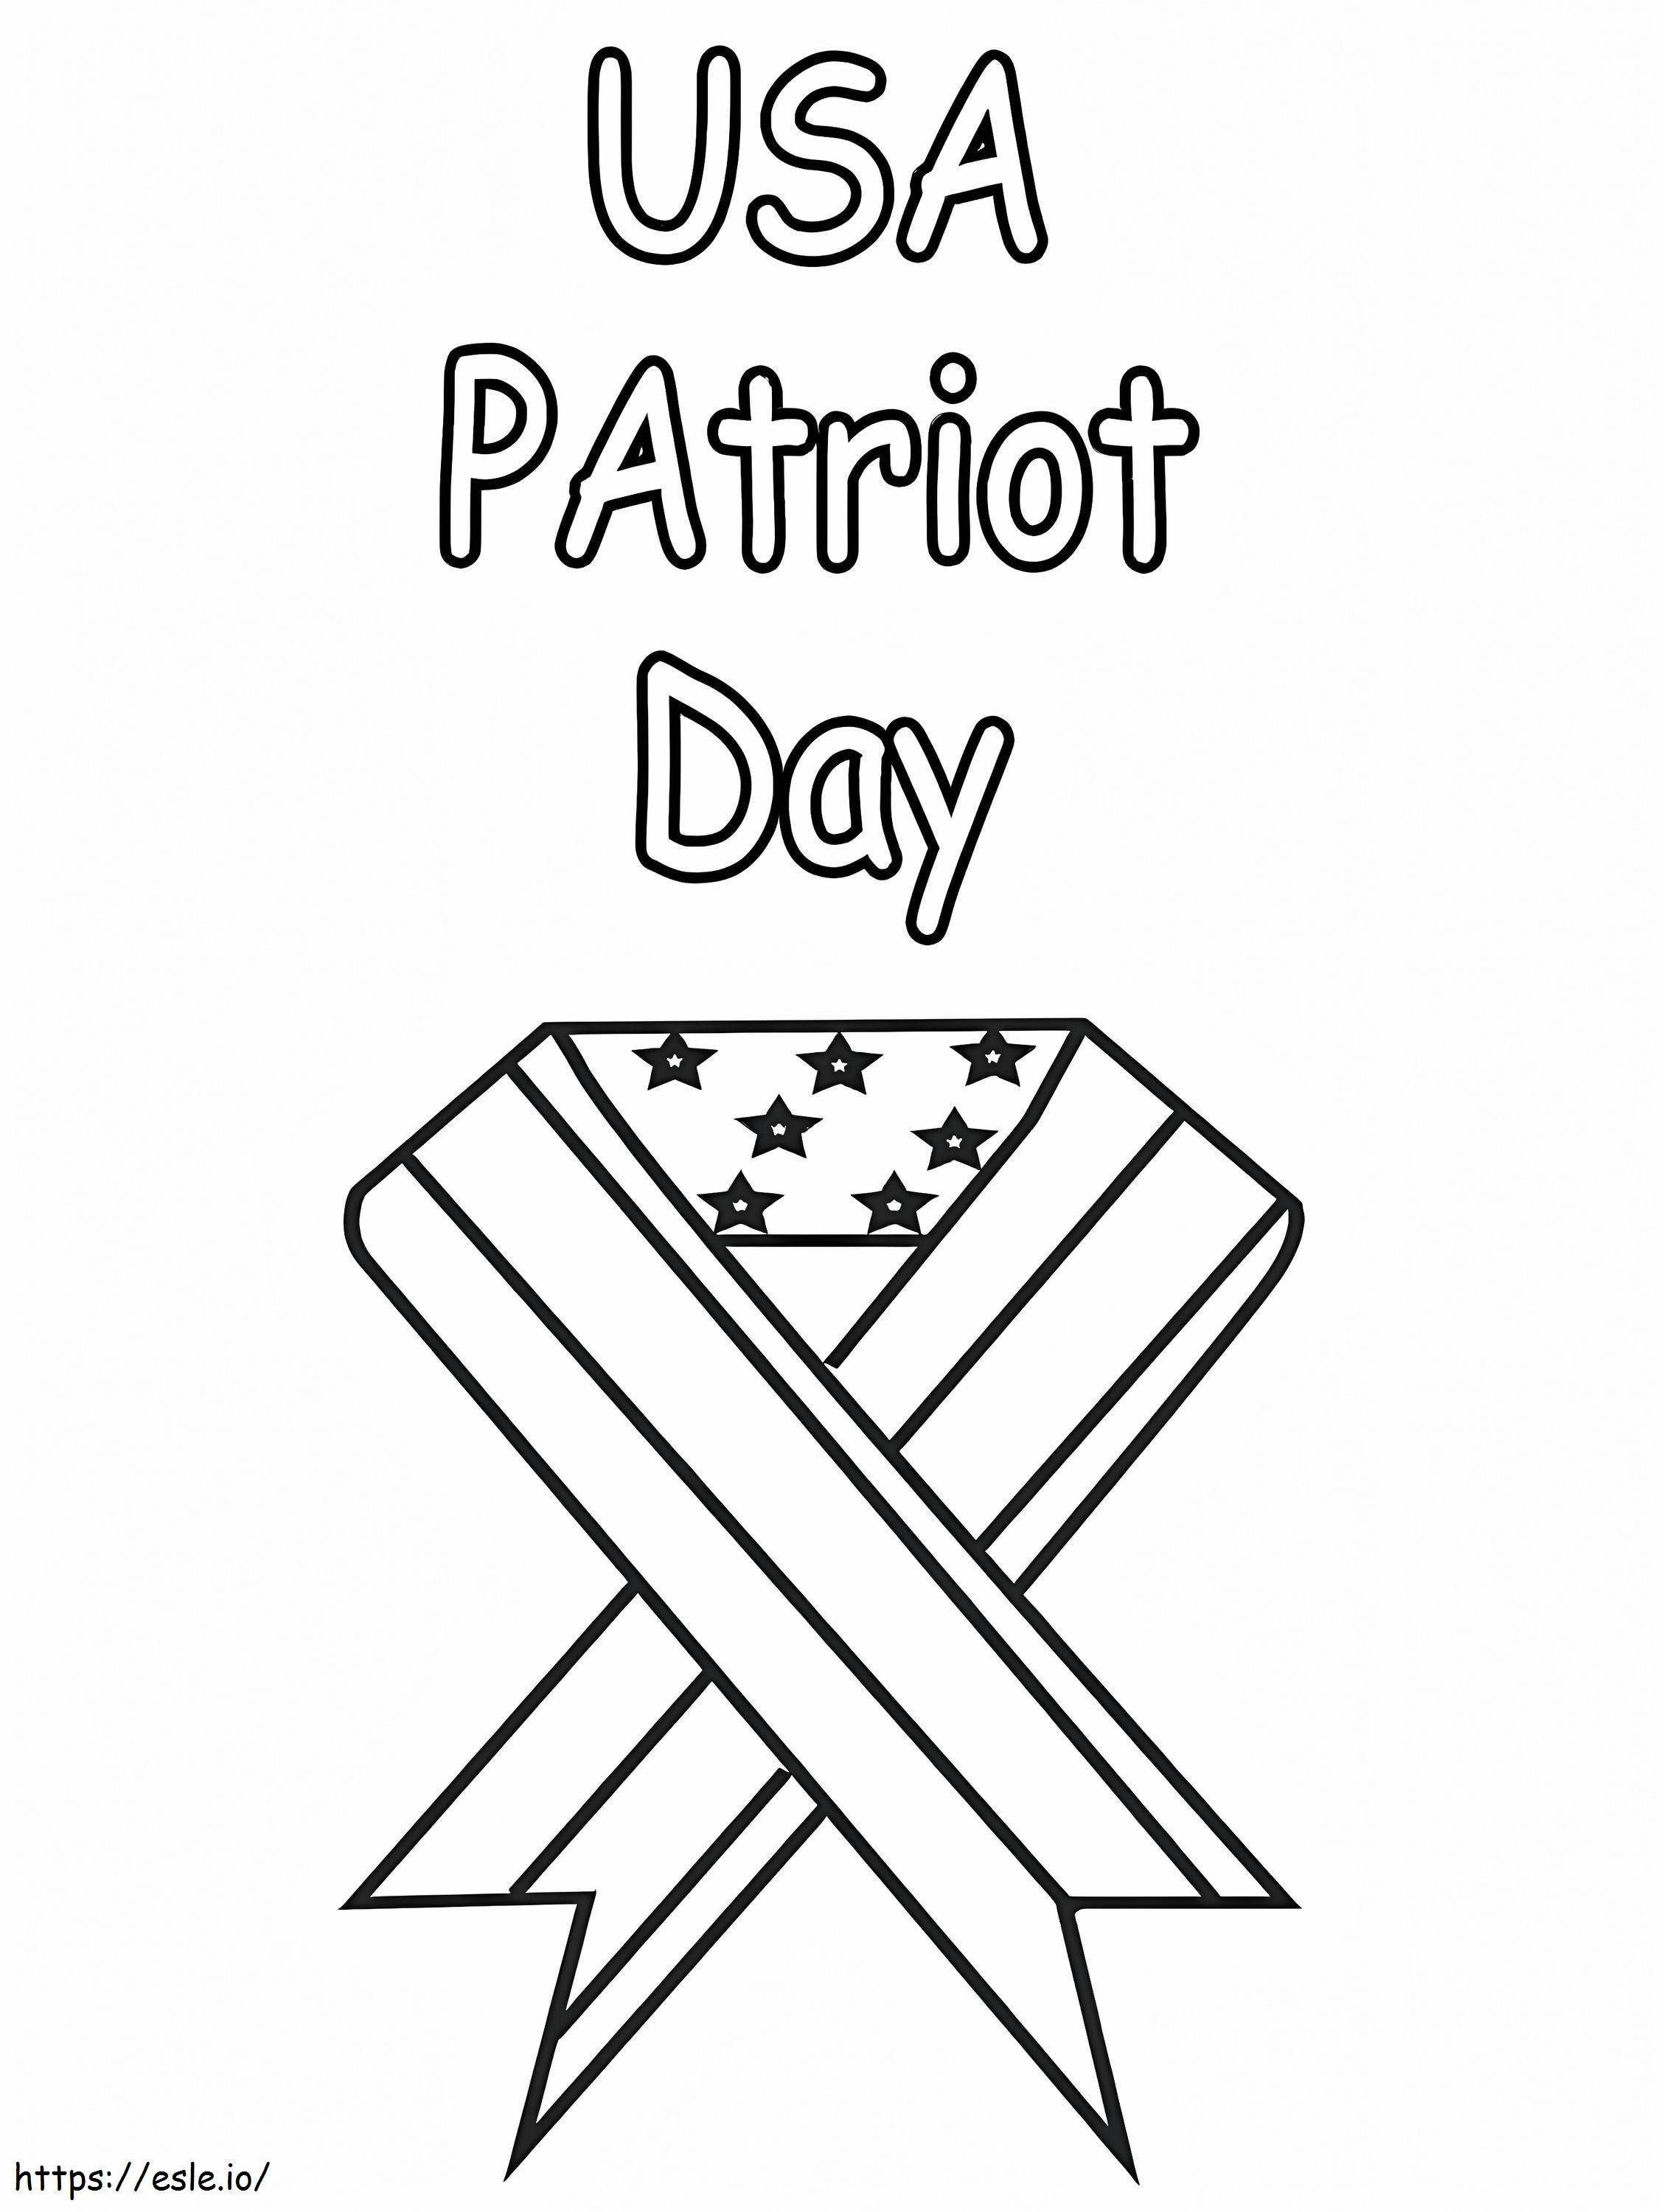 USA Patriot Day coloring page